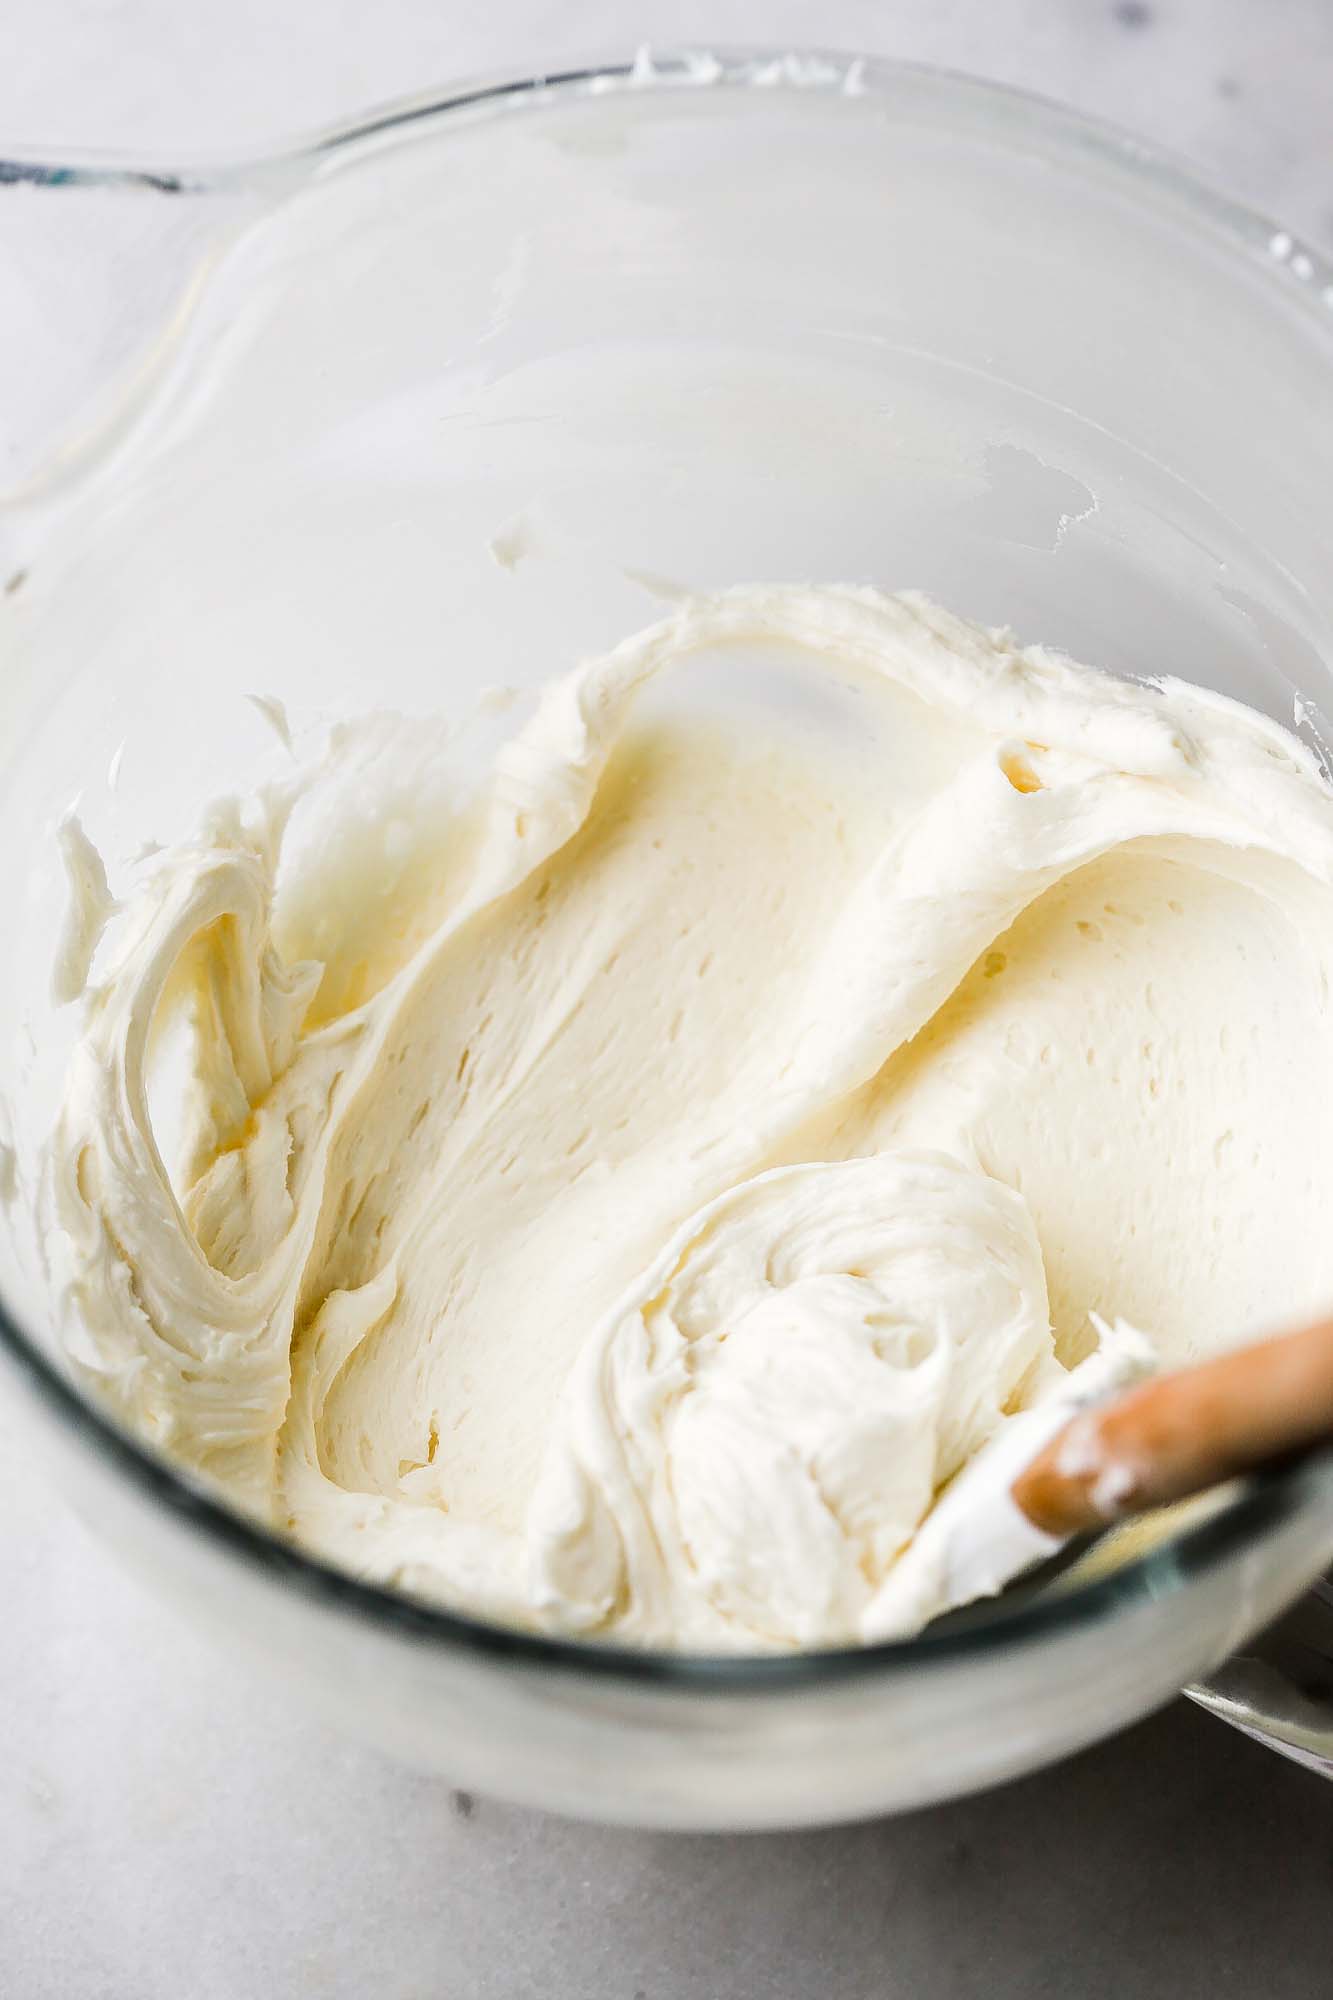 mix until the frosting is silky smooth